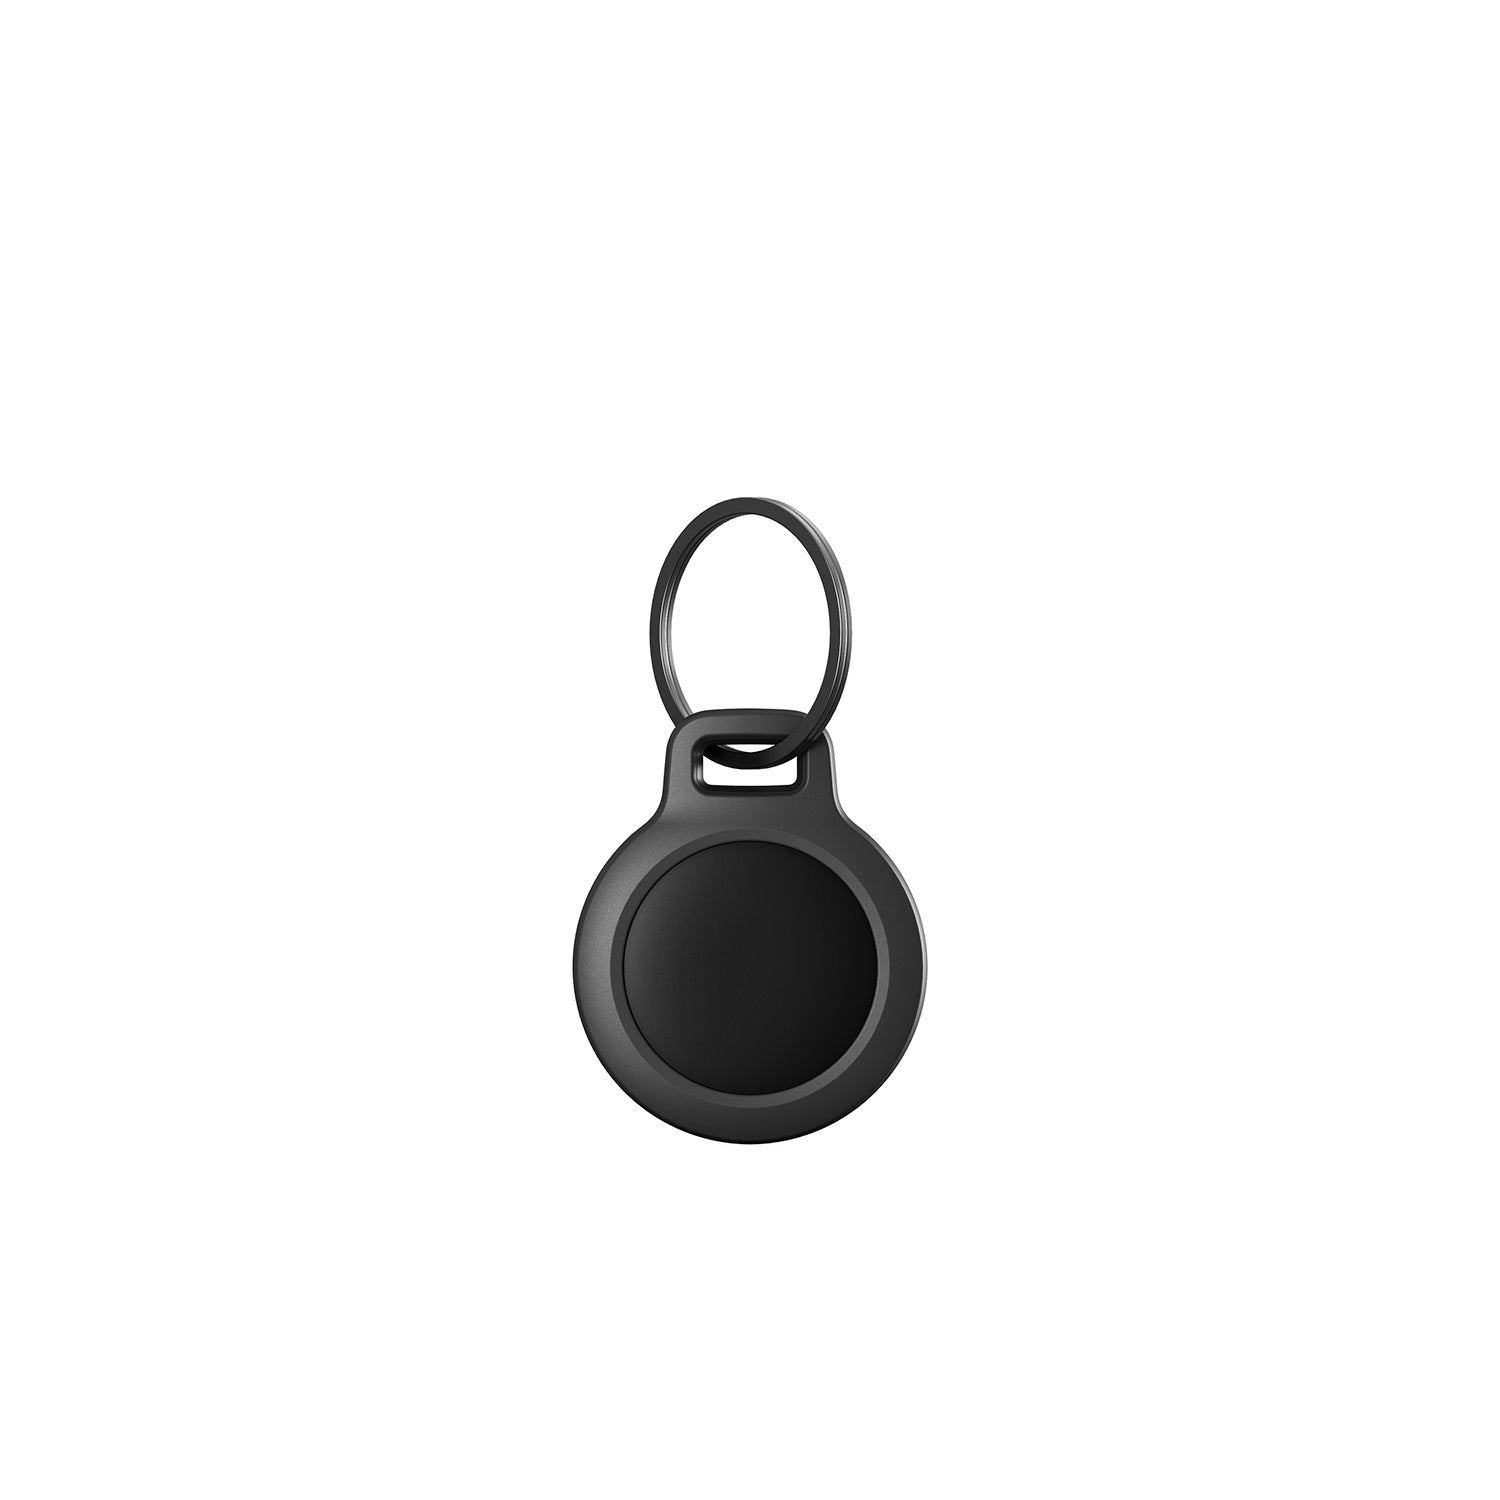 NOMAD Rugged Keychain for AirTag Default NOMAD Black 